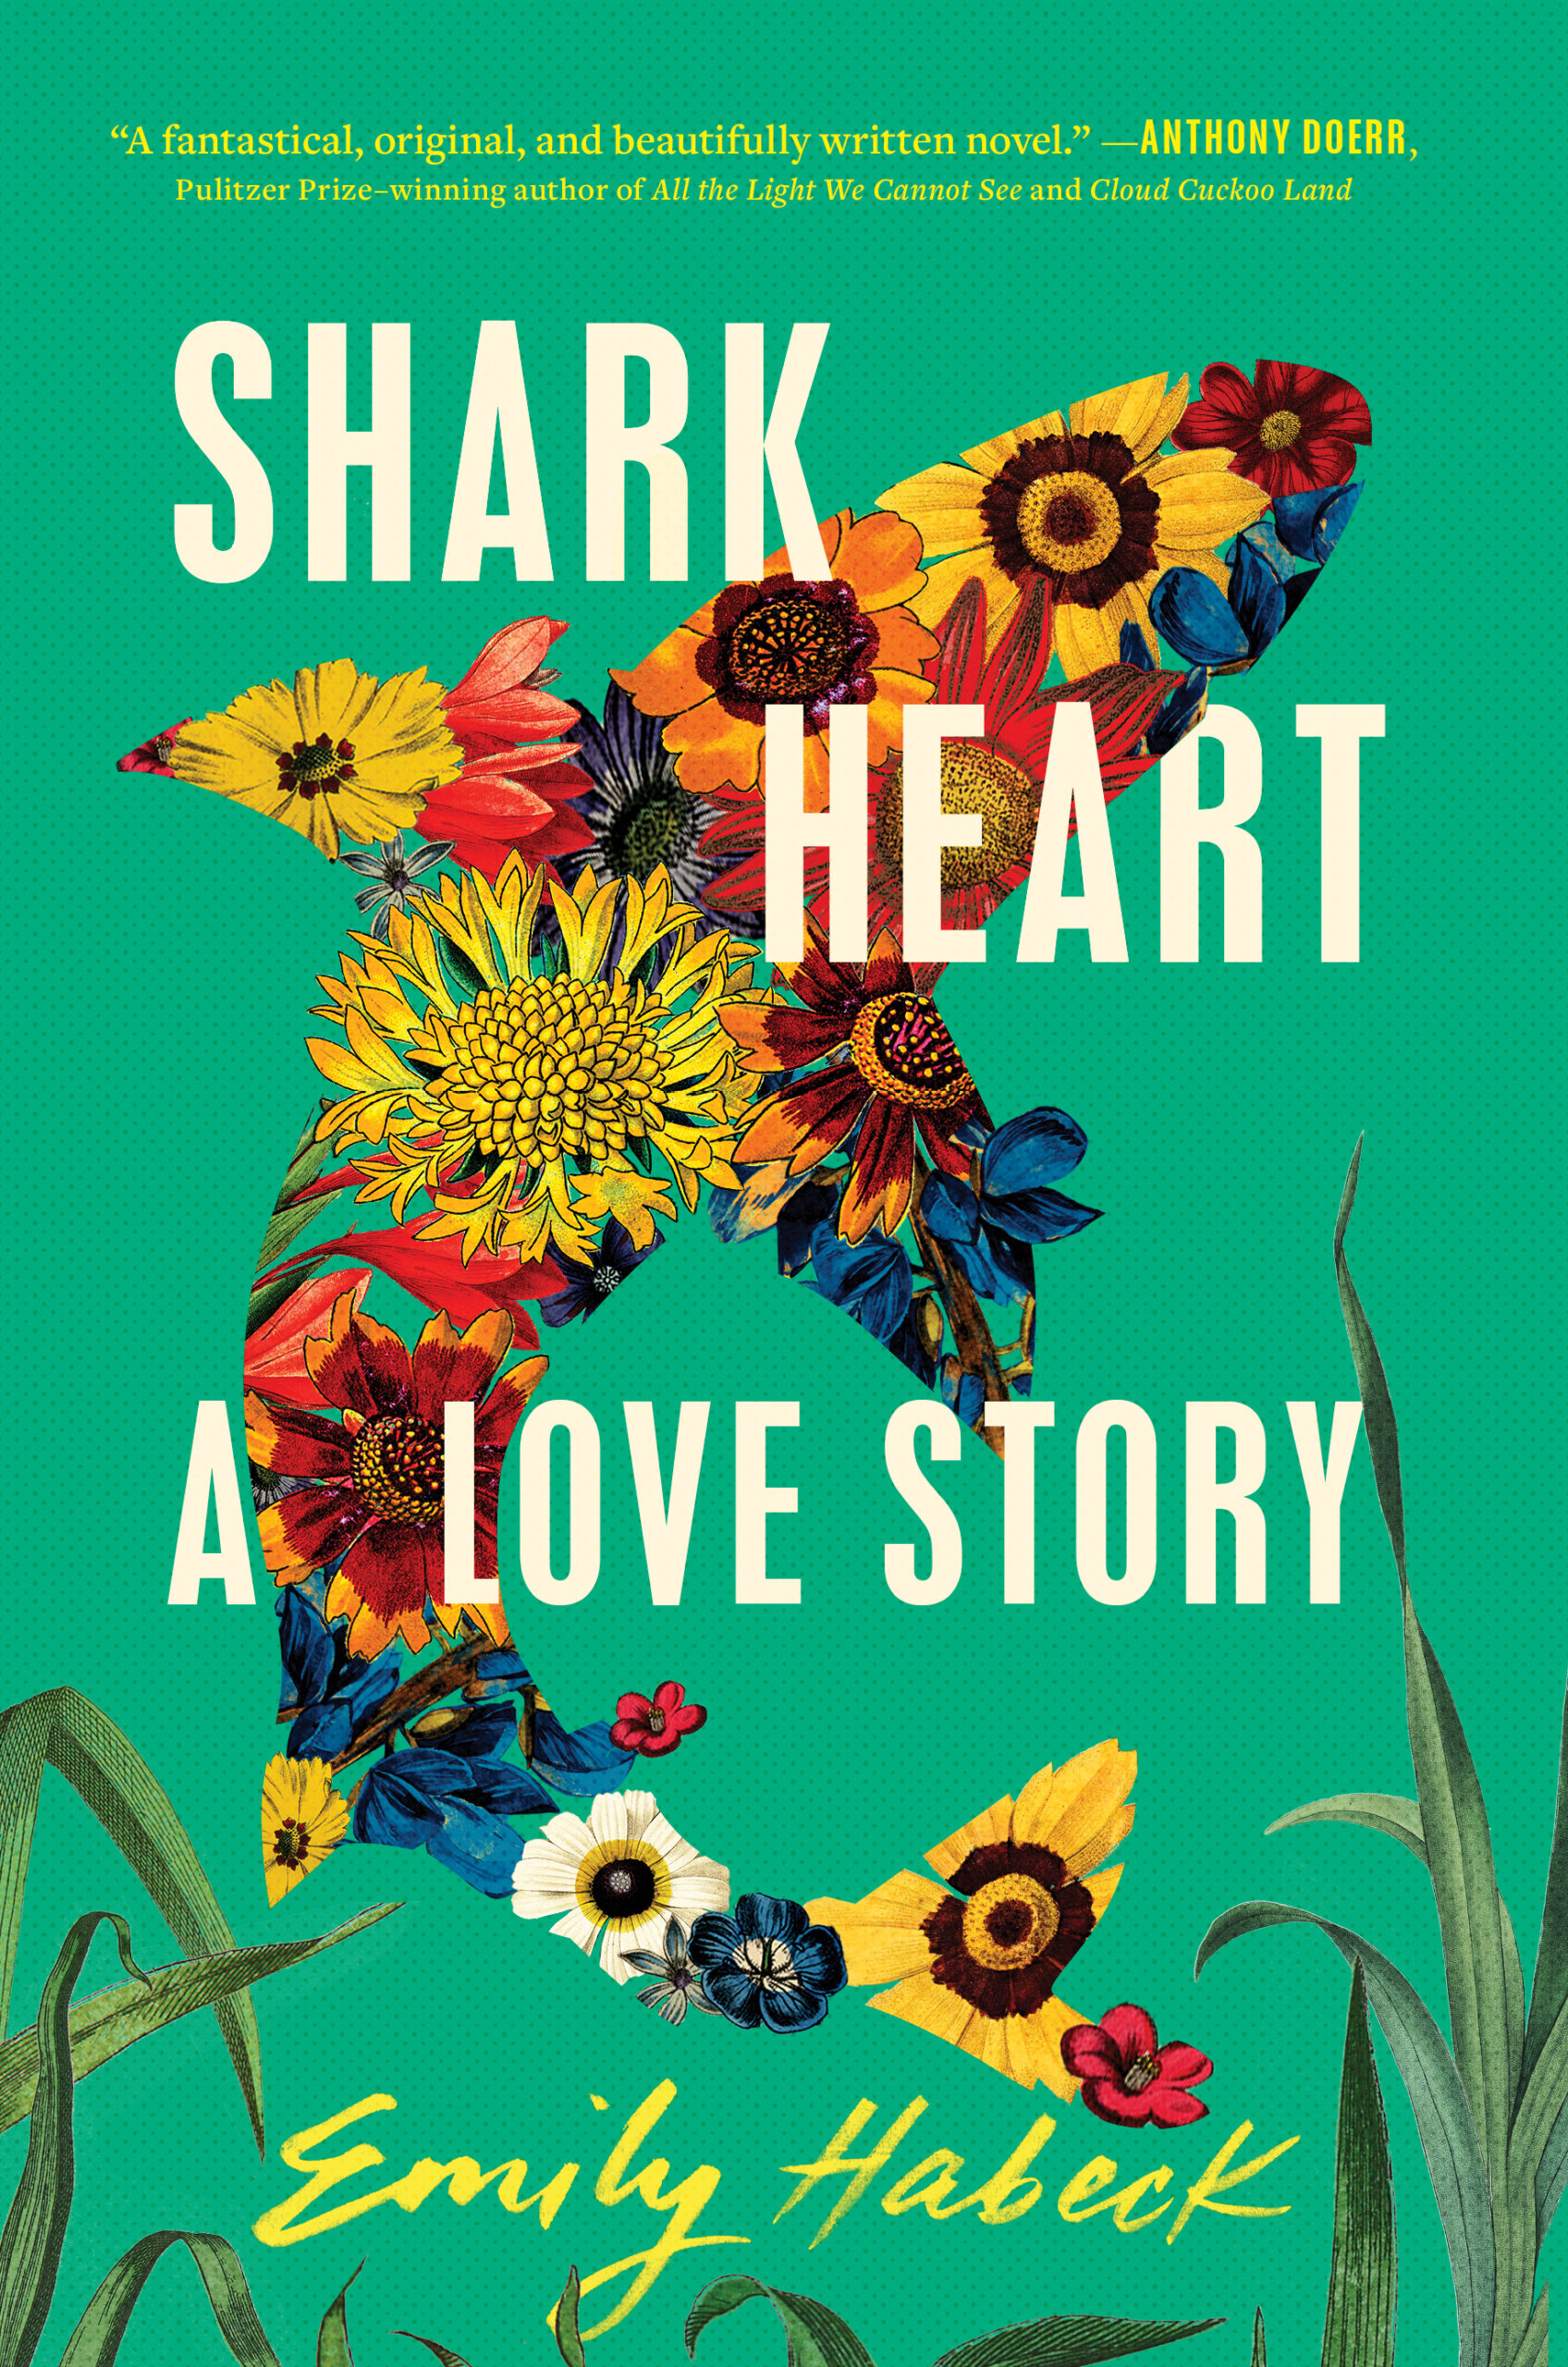 Book Review: Shark Heart by Emily Habeck